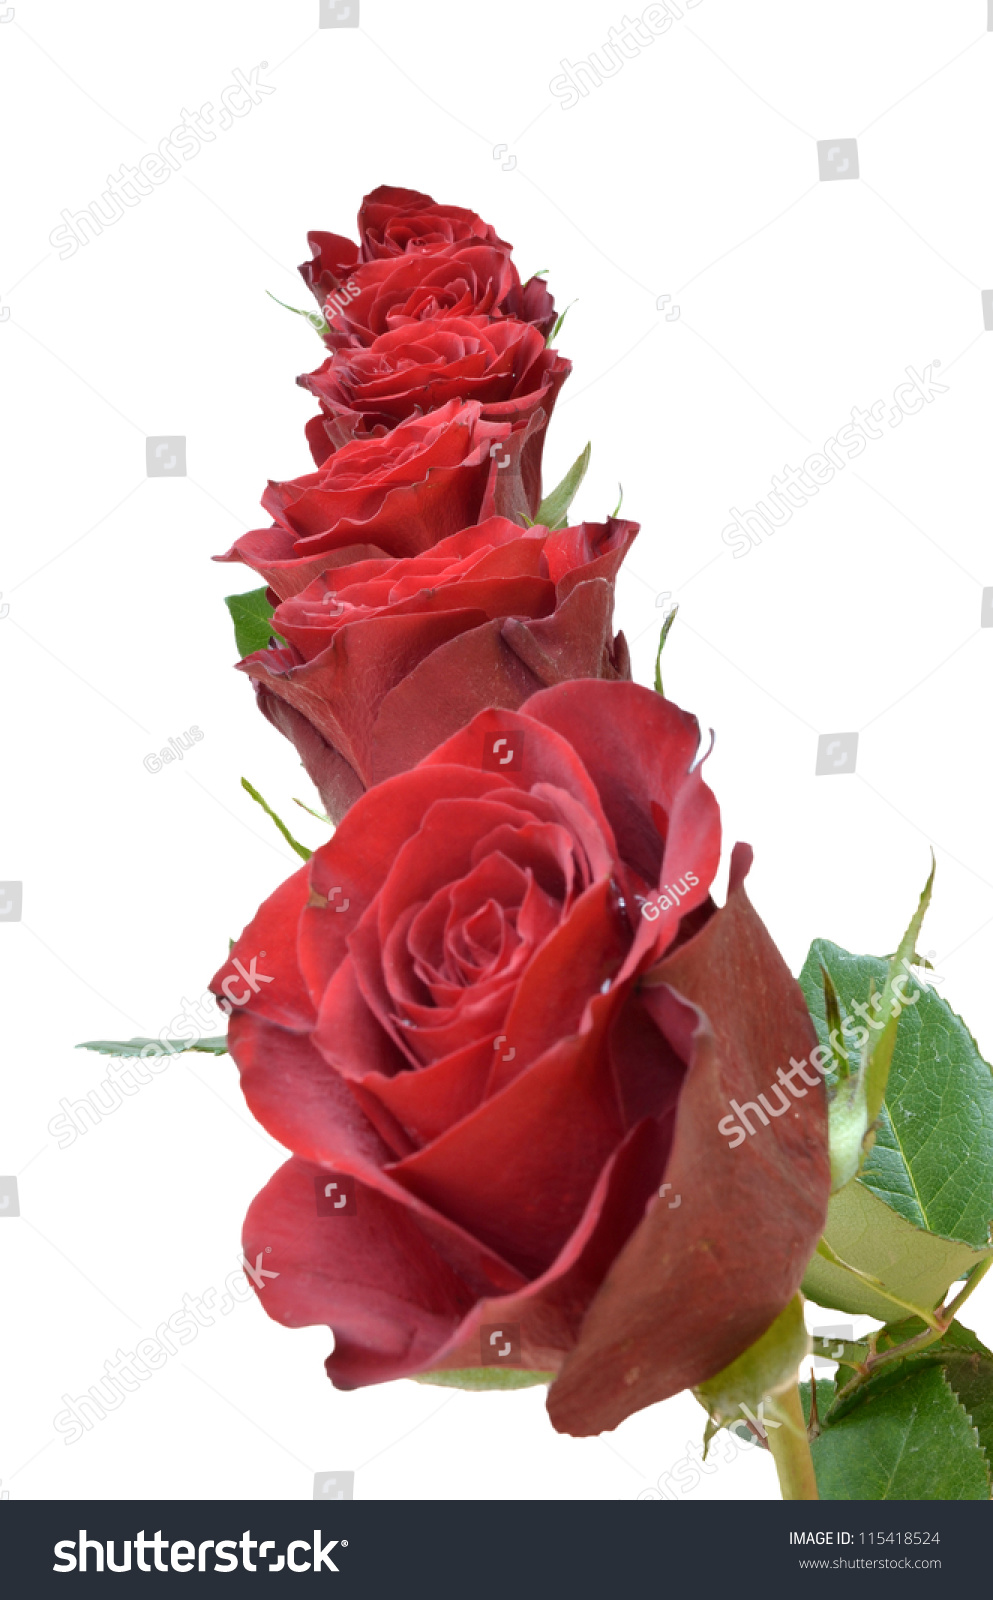 Six Red Roses In A Row, Isolated On A White Background. Stock Photo ...